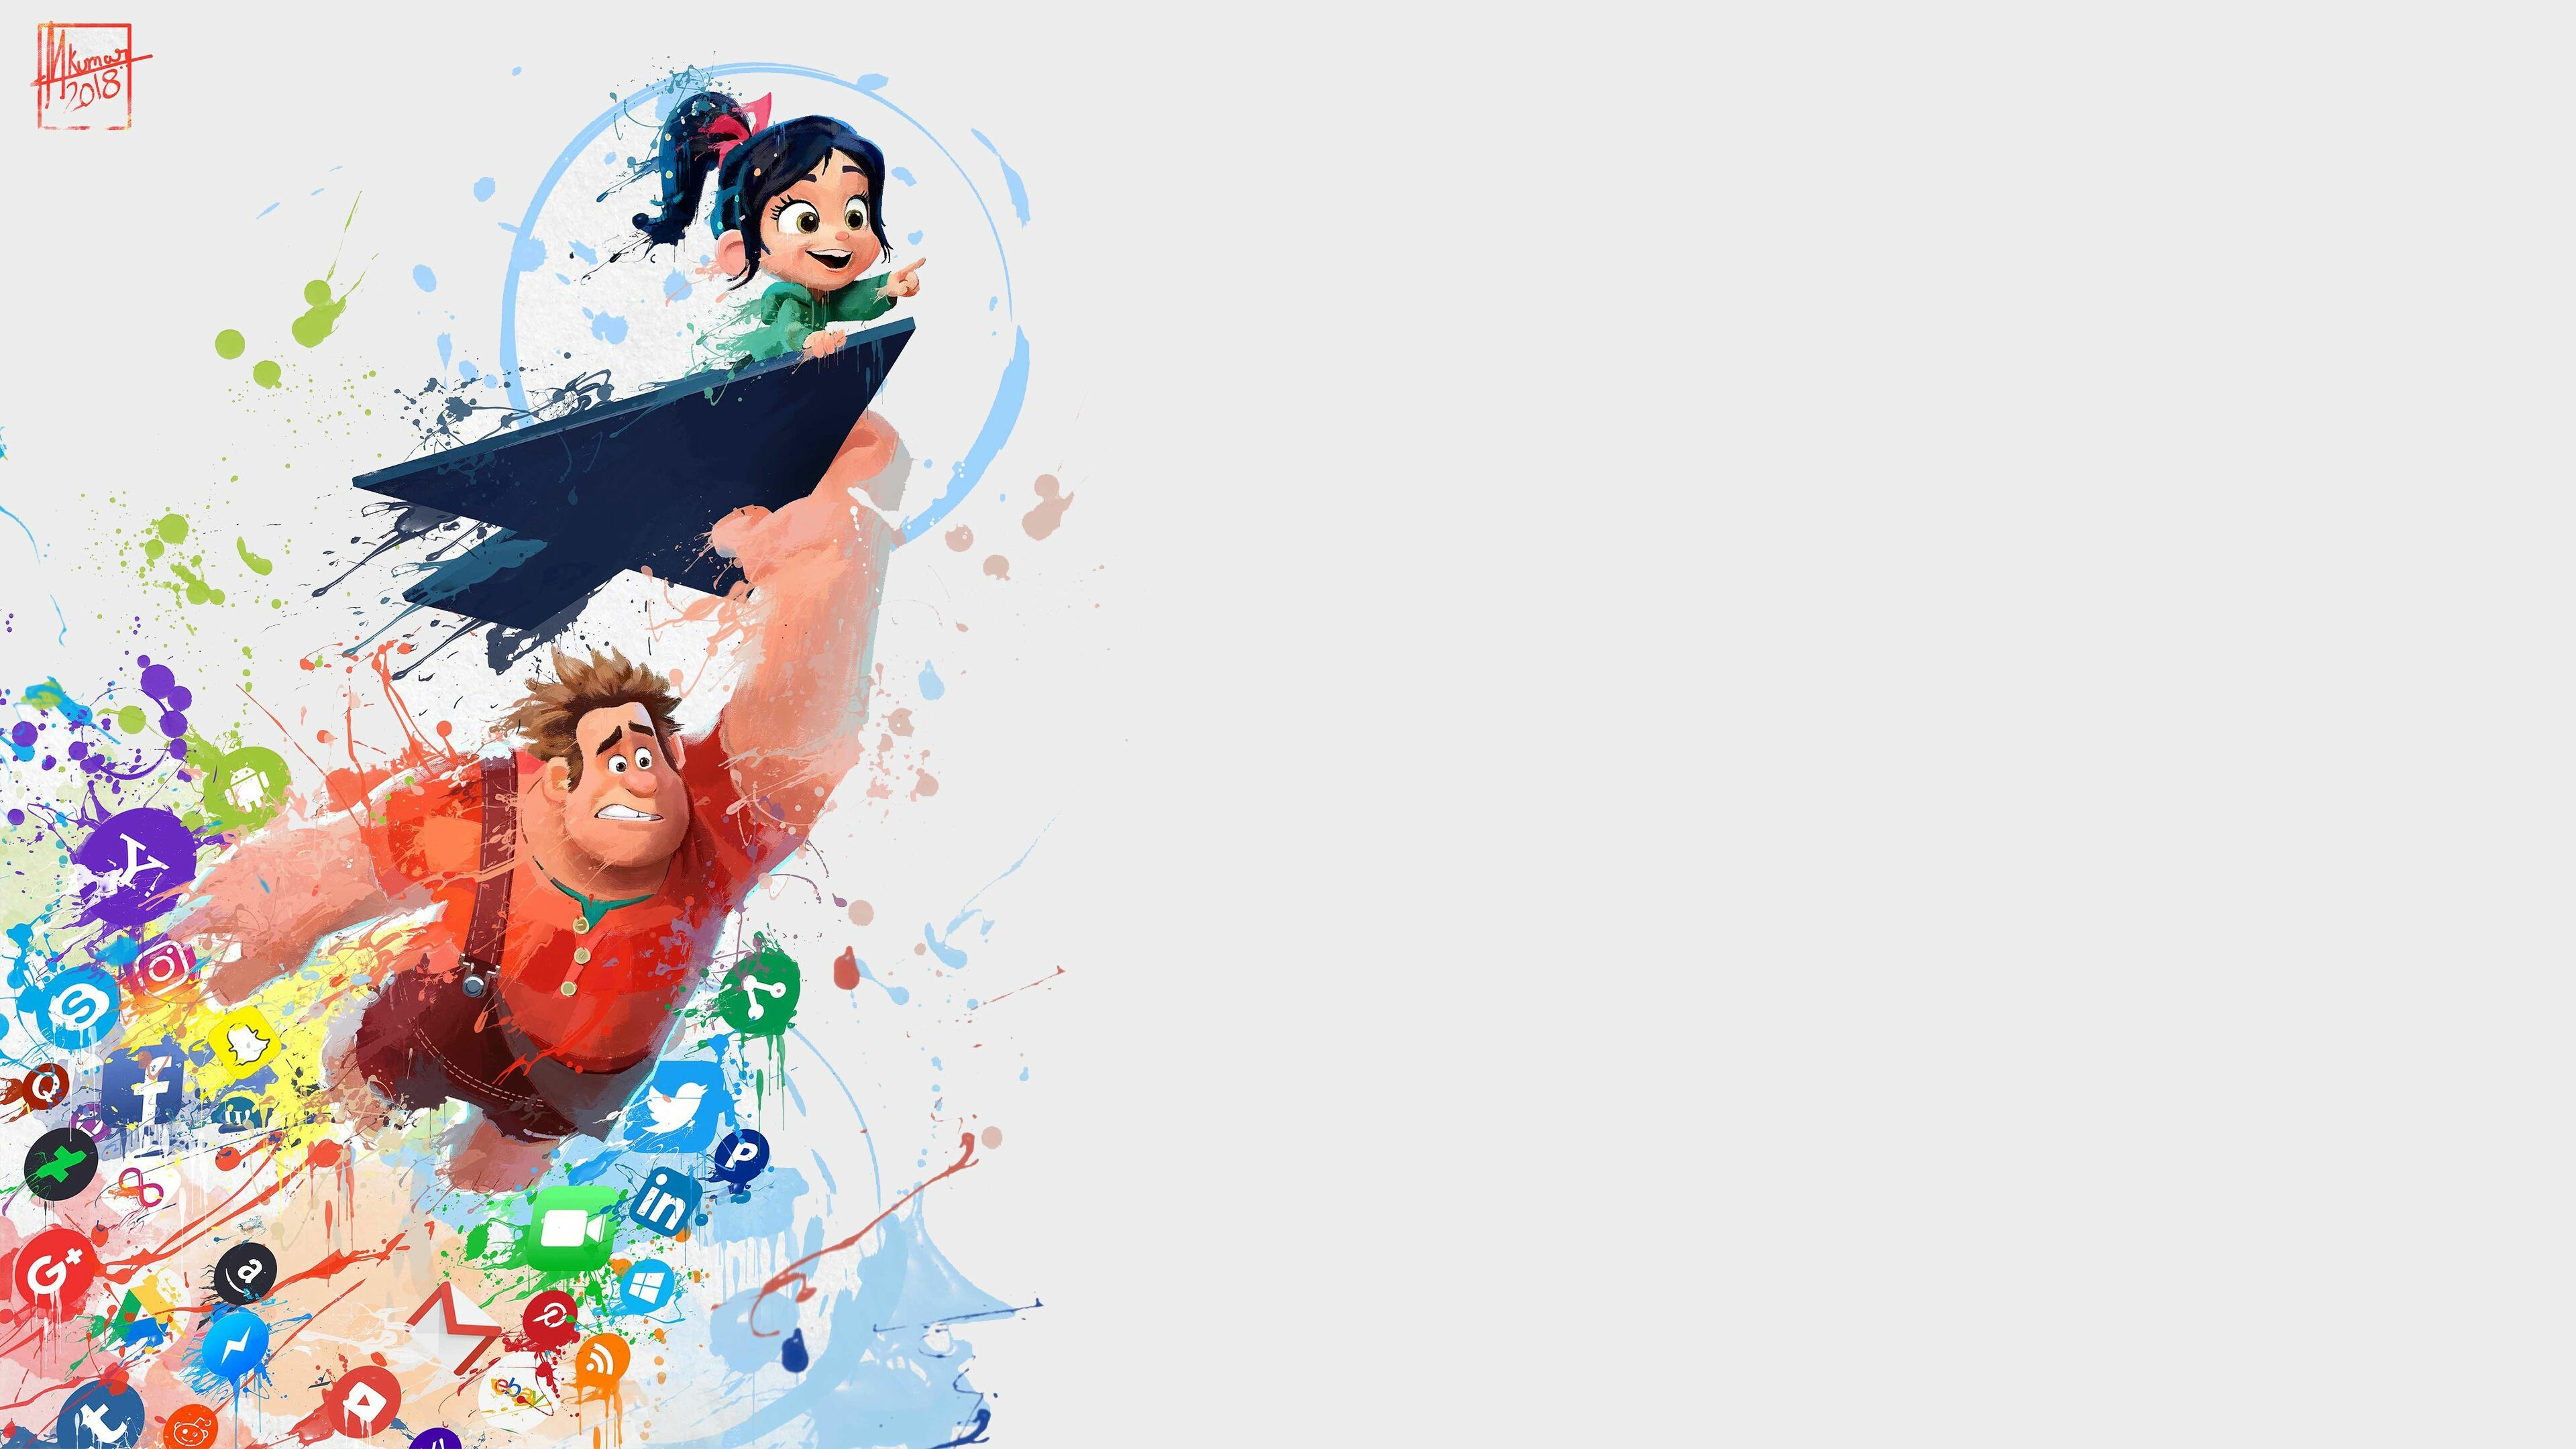 Wreck-It Ralph: A 2012 American computer-animated comedy film produced by Walt Disney Animation Studios and released by Walt Disney Pictures. 3840x2160 4K Wallpaper.